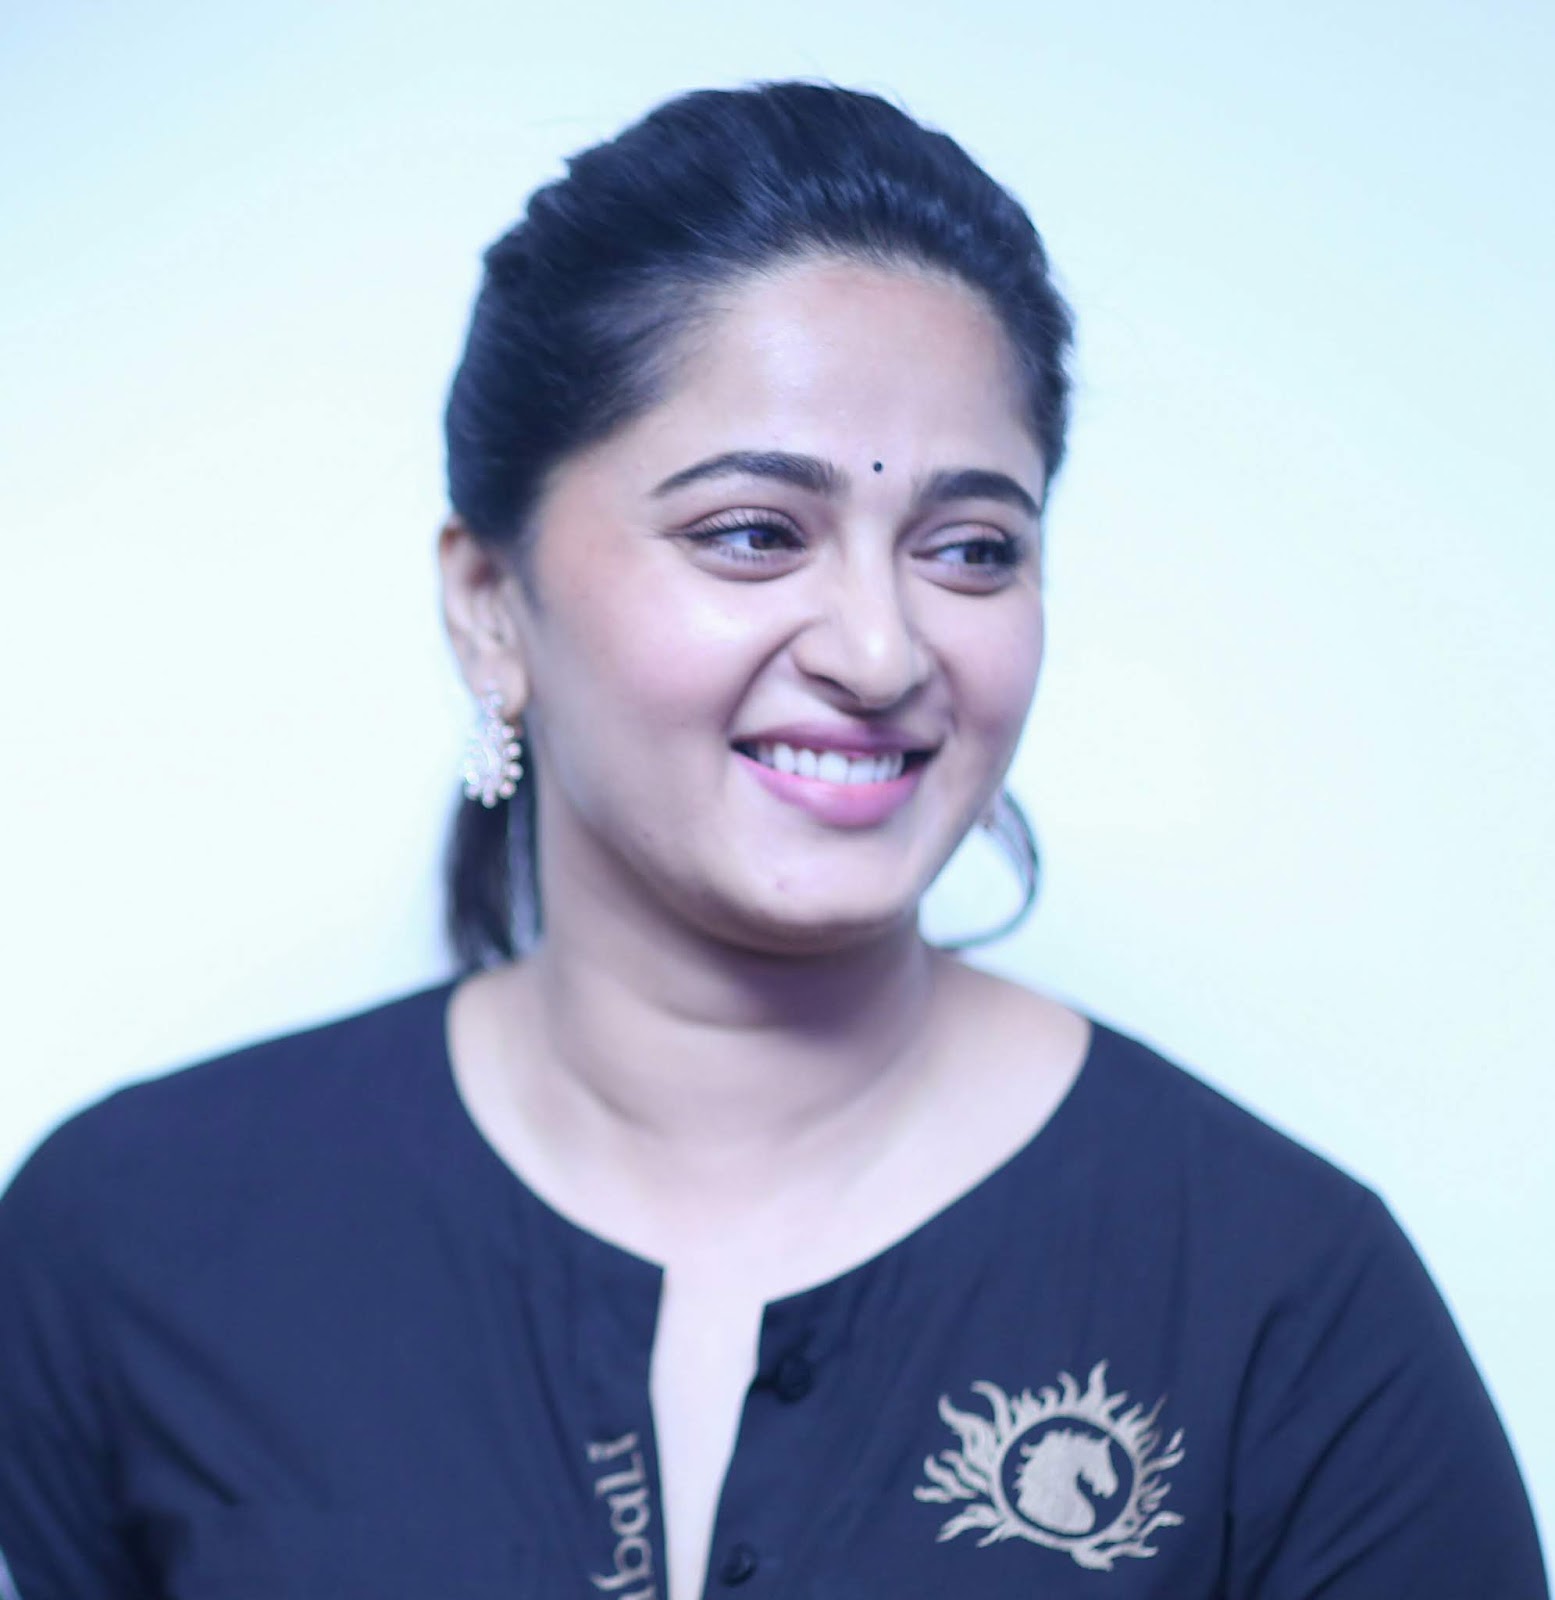 Anushka Shetty Stills At Bahubali2 Press Meet Latest Indian Hollywood Movies Updates Branding Online And Actress Gallery